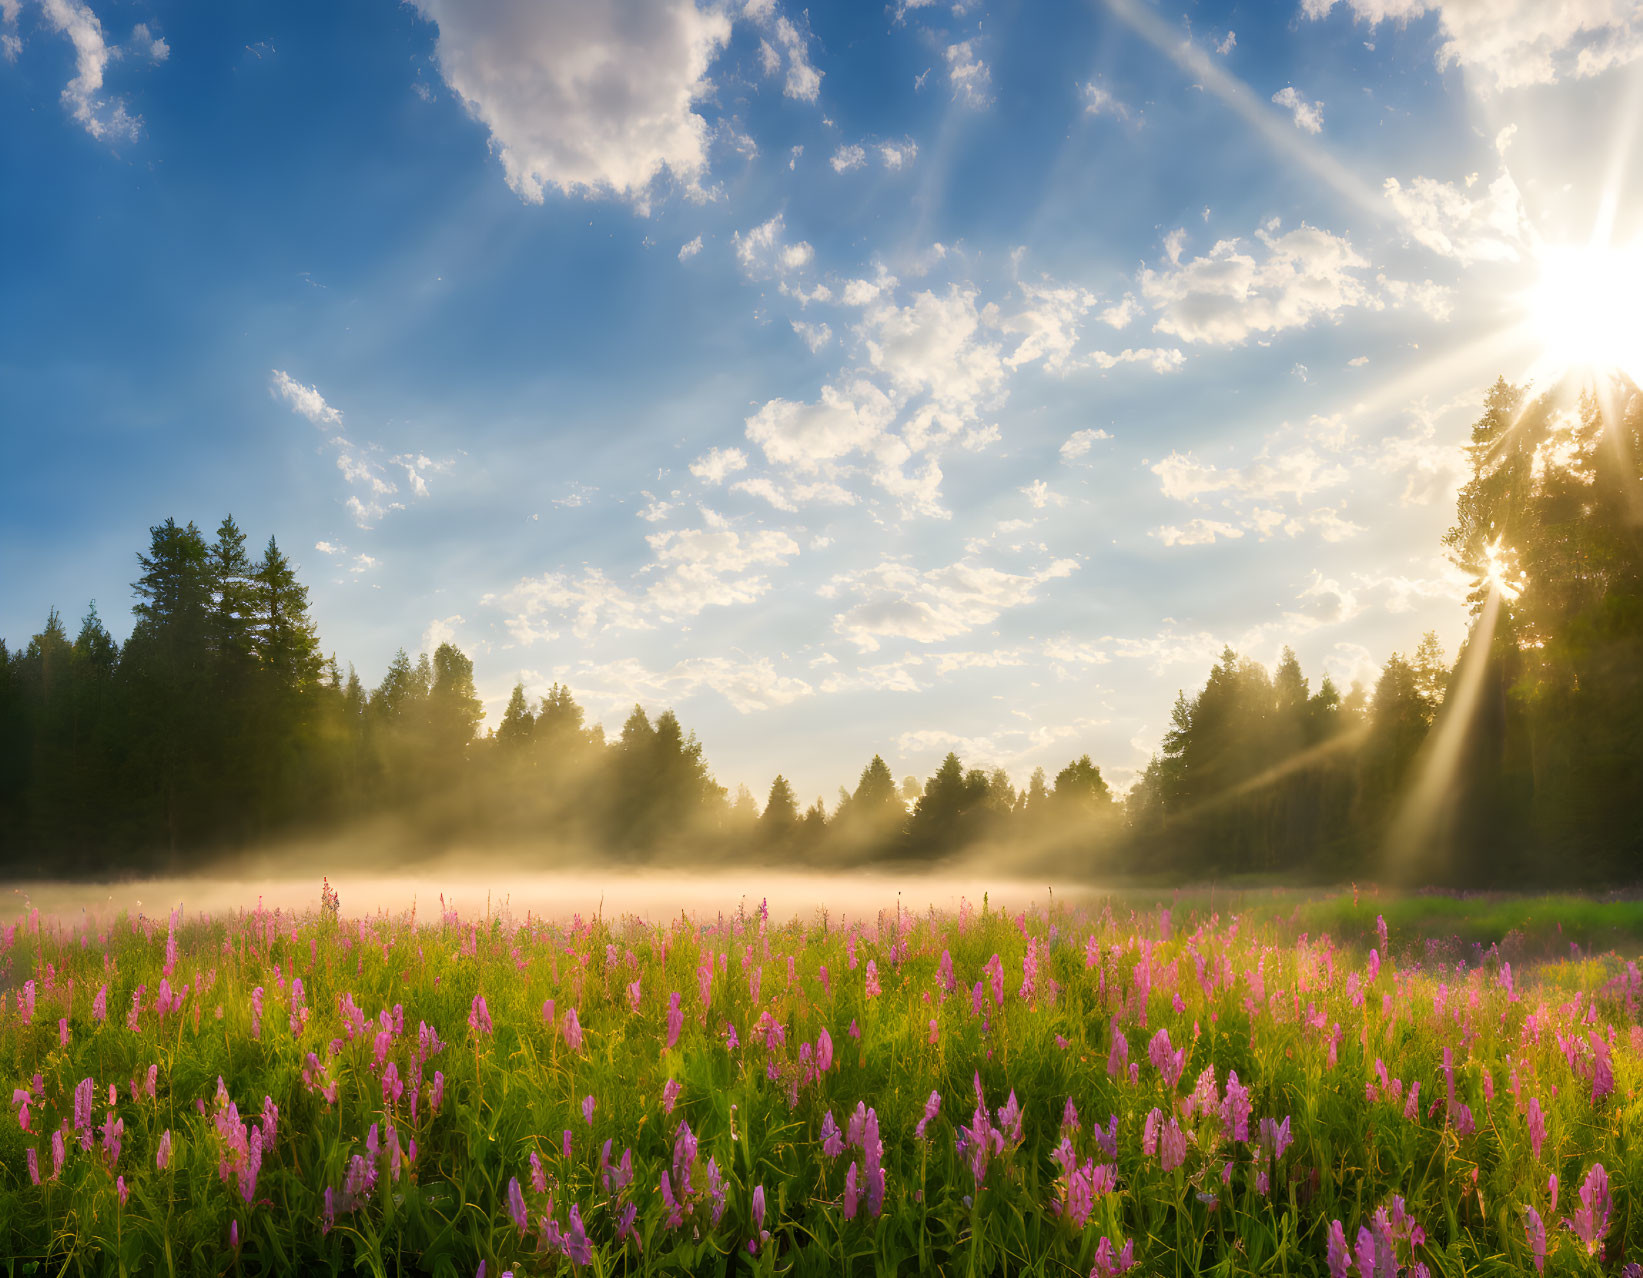 Misty meadow at sunrise with pink wildflowers and forest backdrop